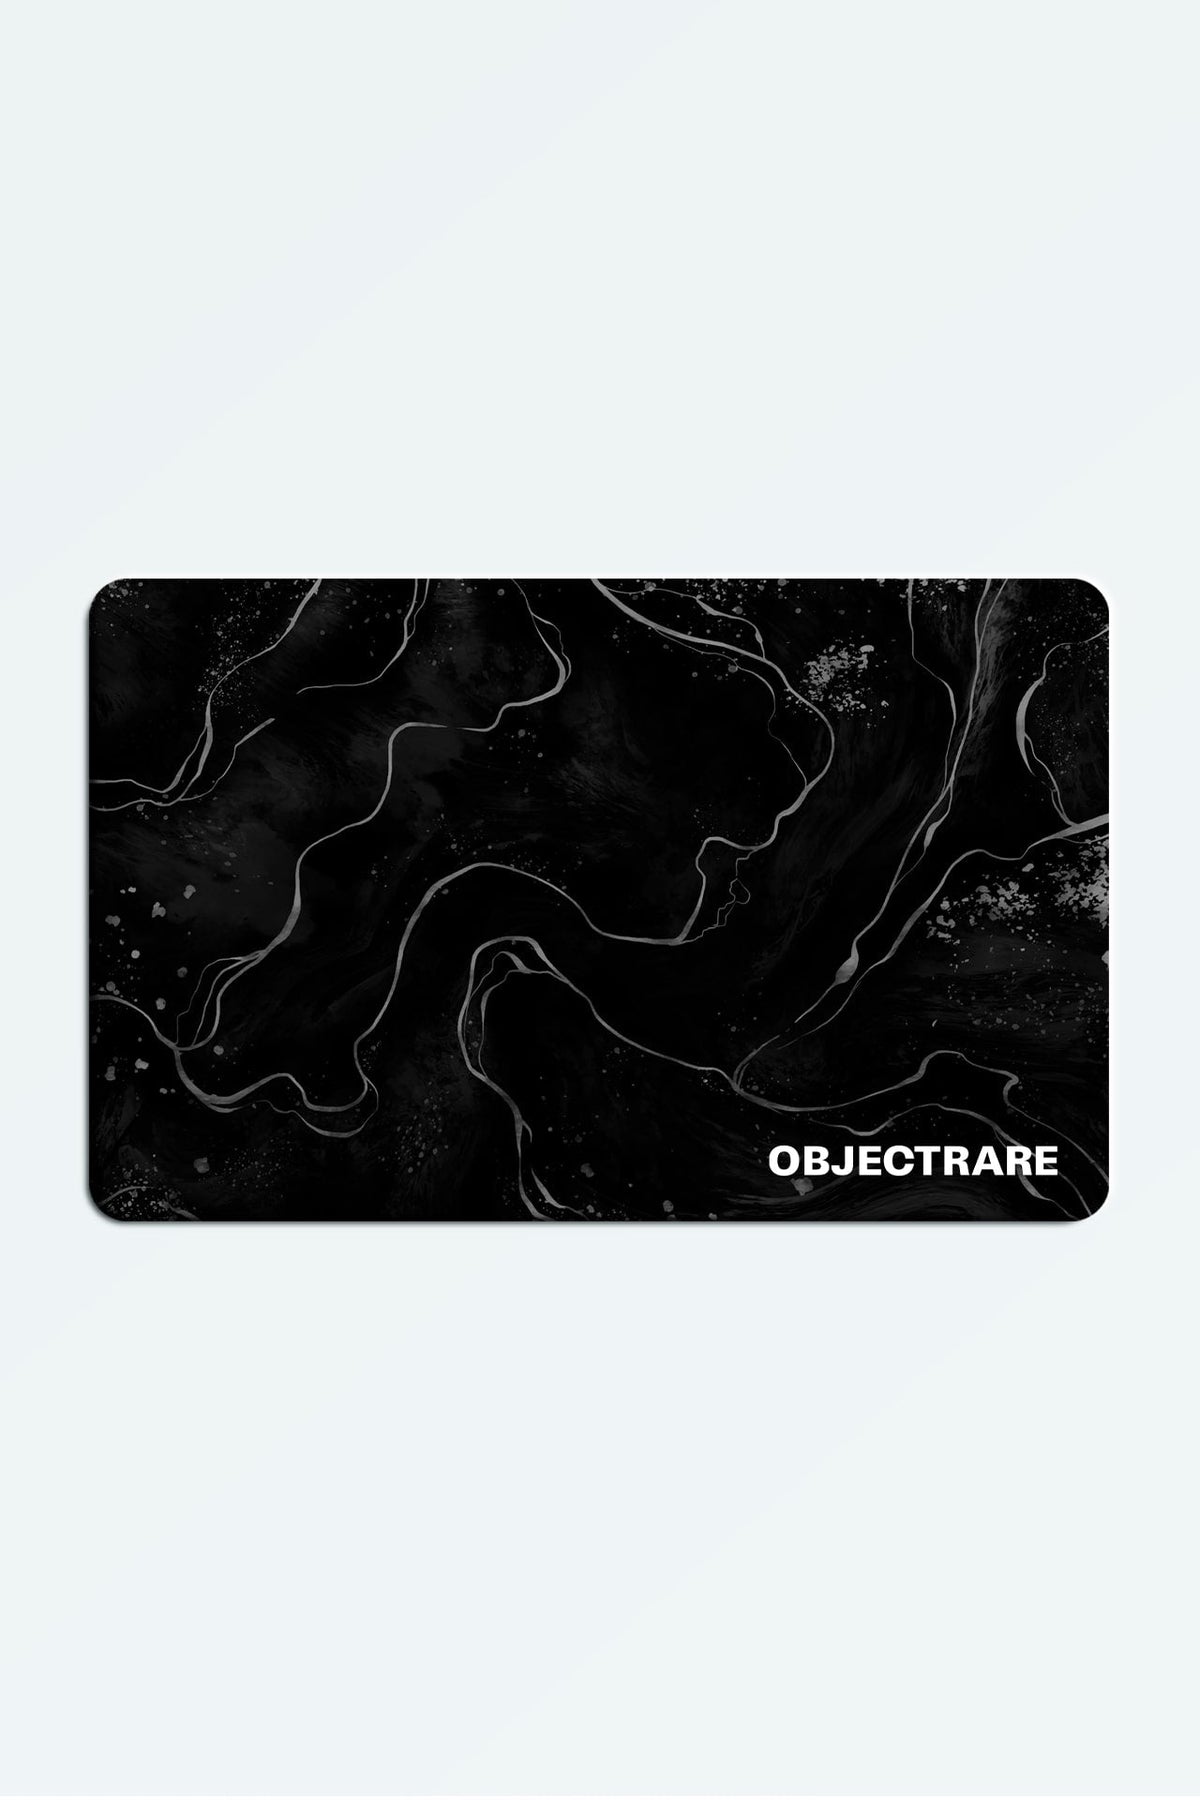 OBJECTRARE - Rare eGift Card + $10 Bonus Card - Gift Cards available at Objectrare